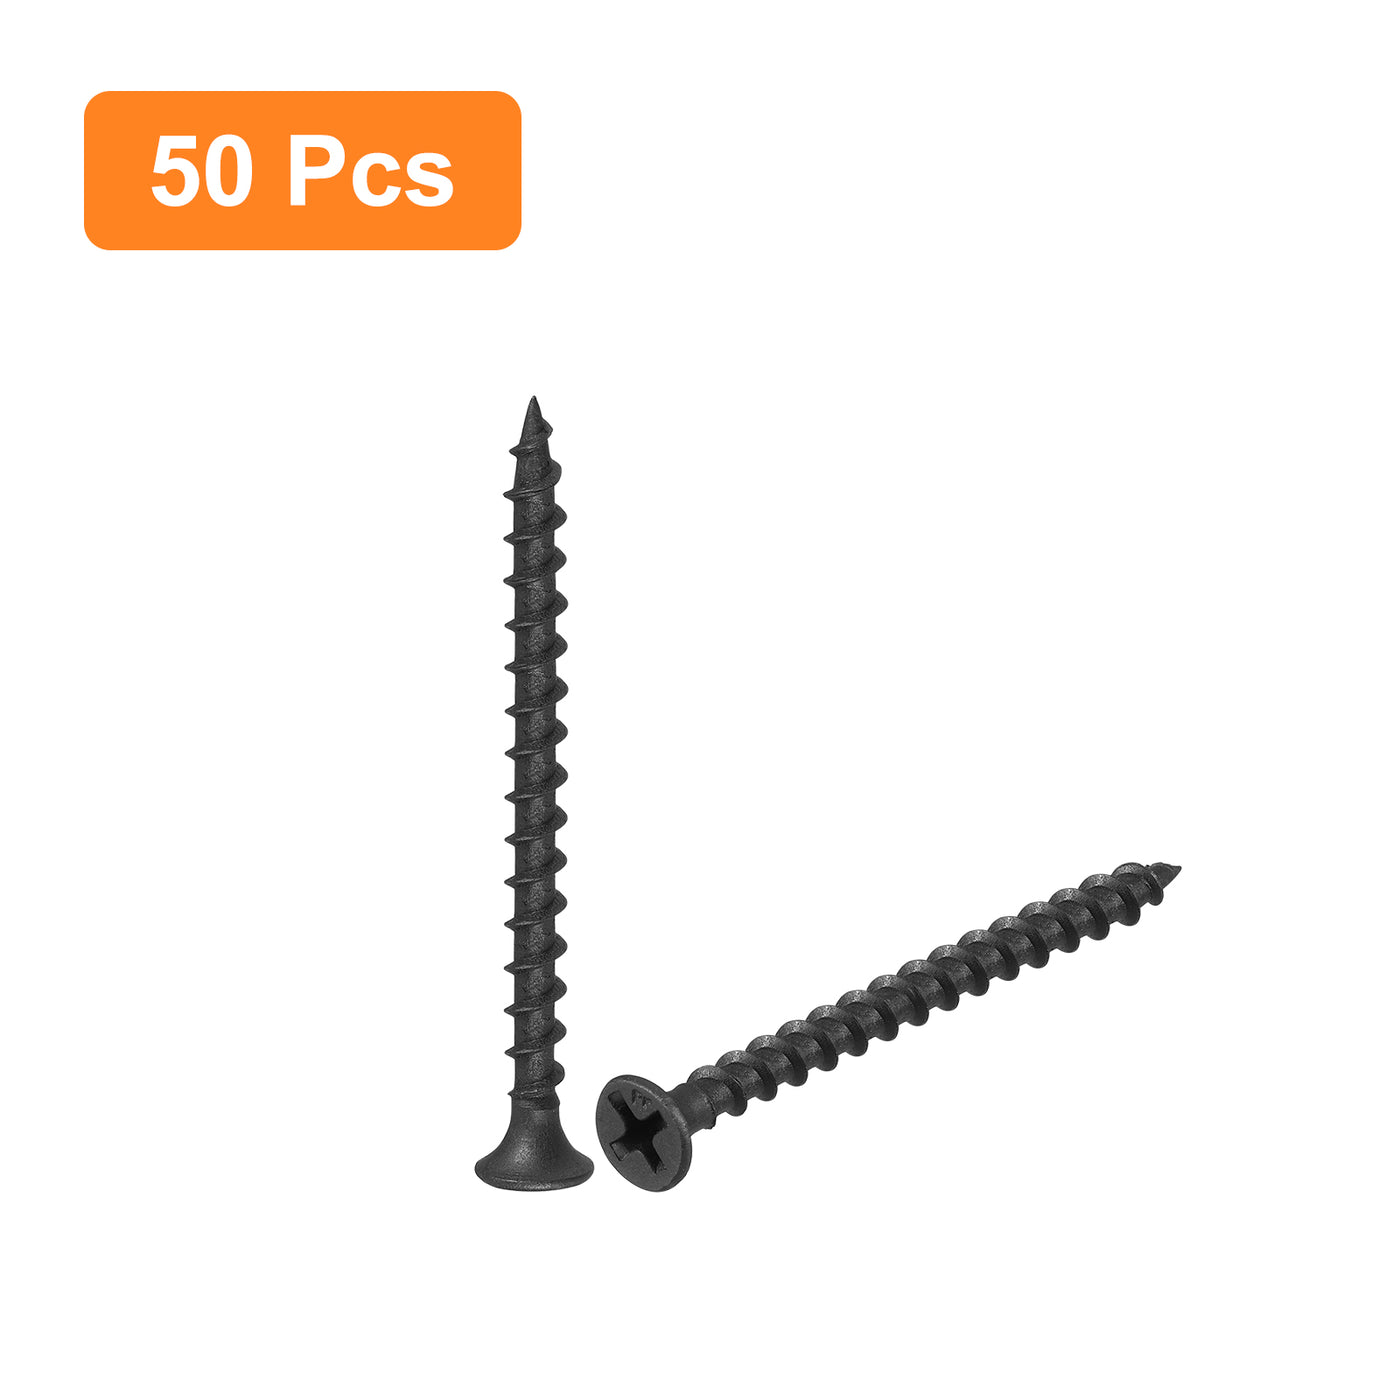 uxcell Uxcell M3.8x50mm 50pcs Phillips Drive Wood Screws, Carbon Steel Self Tapping Screws